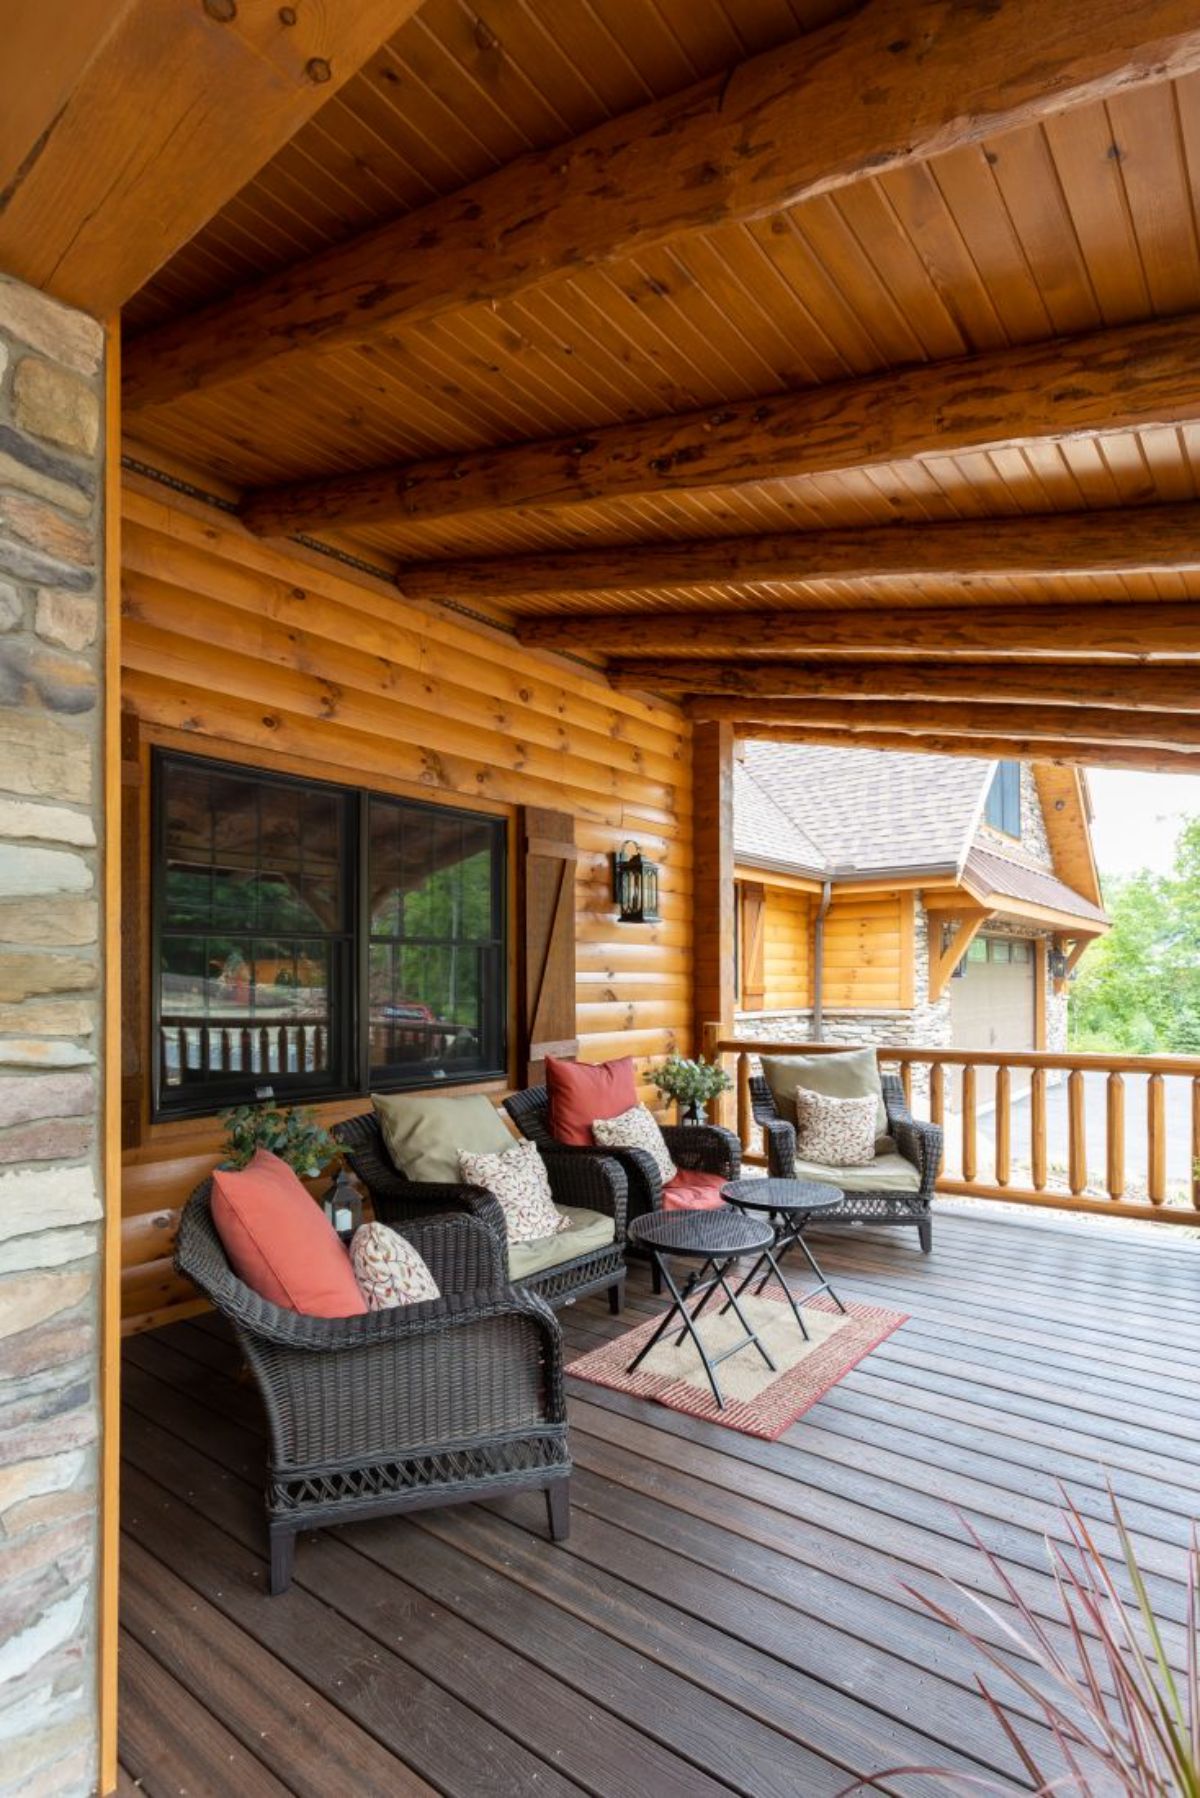 brown wicker chairs with ivory and red cushions on front porch of log cabin